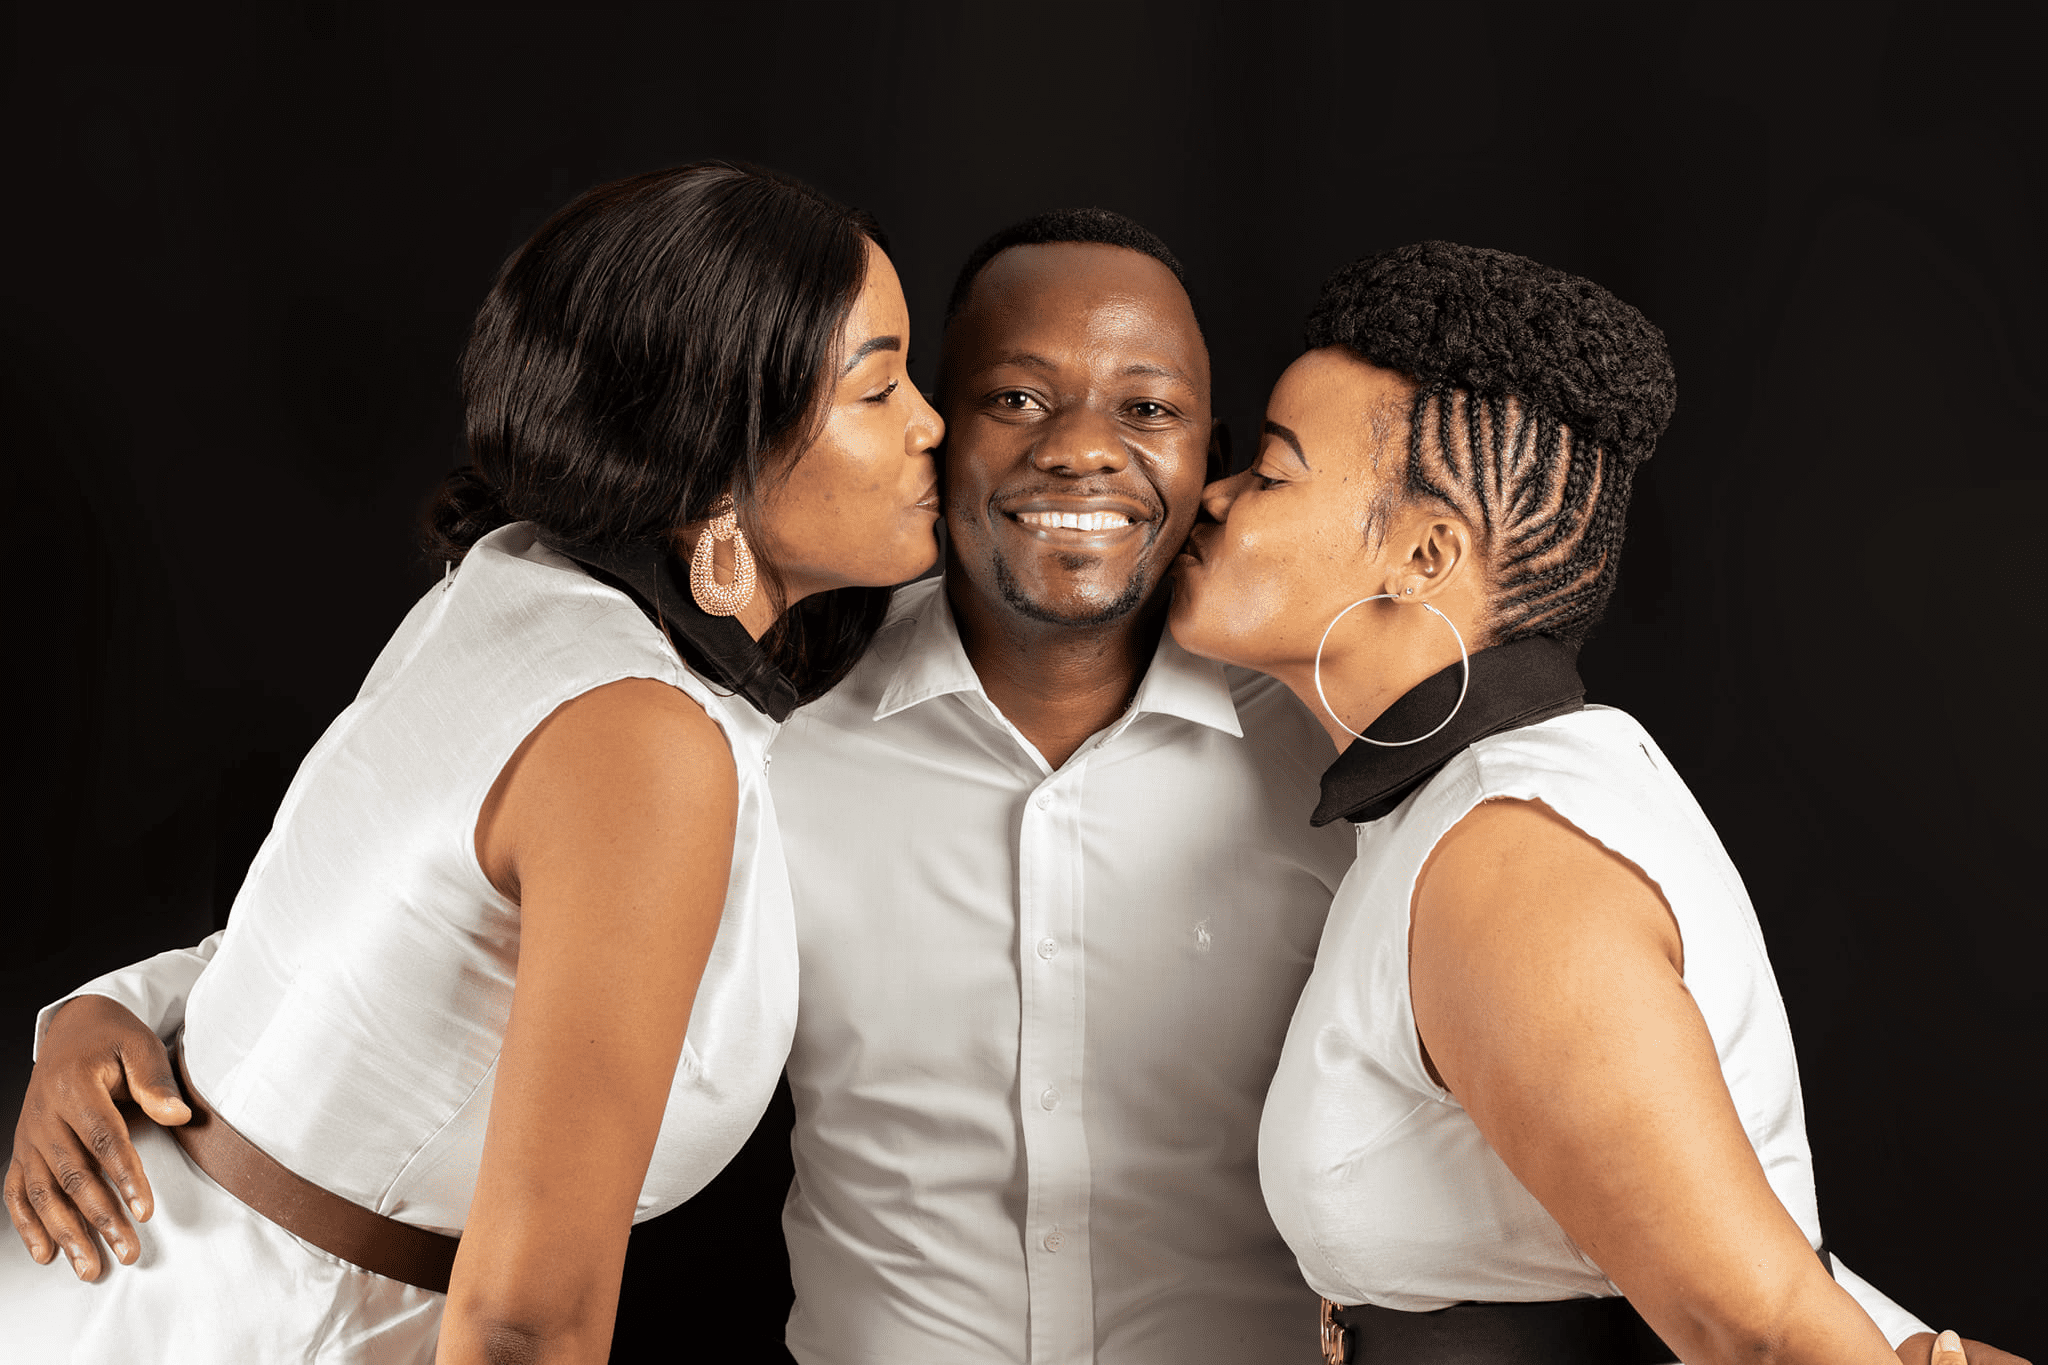 ”Men Decide When to Get Married and How Many Wives He Wants, Stop Violating Men”-Botswana Polygamist Pastor says (PHOTOS)